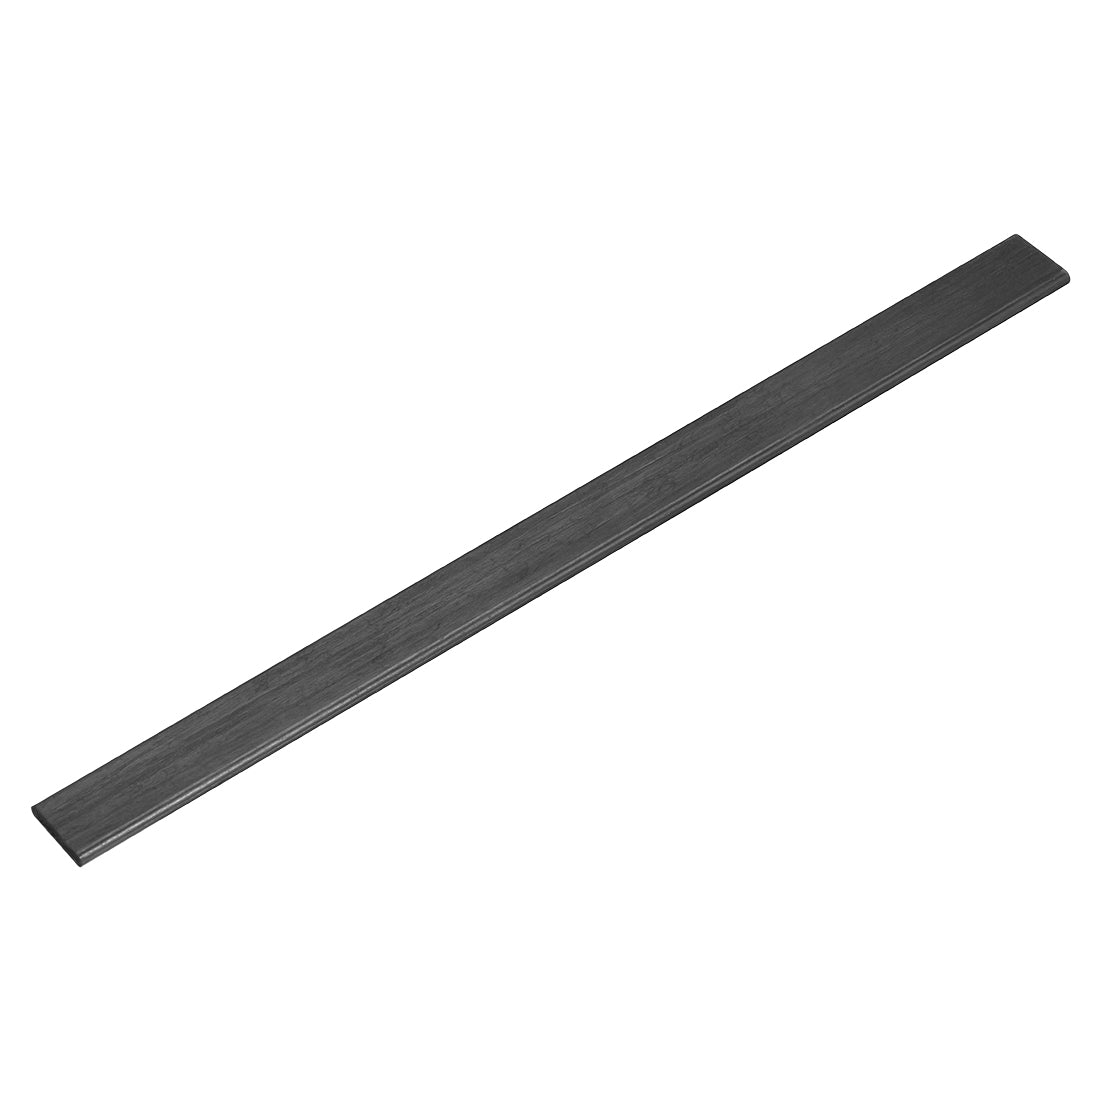 uxcell Uxcell Carbon Fiber Strip Bars 3x15mm 200mm Length Pultruded Carbon Fiber Strips for Kites, RC Airplane 1 Pcs